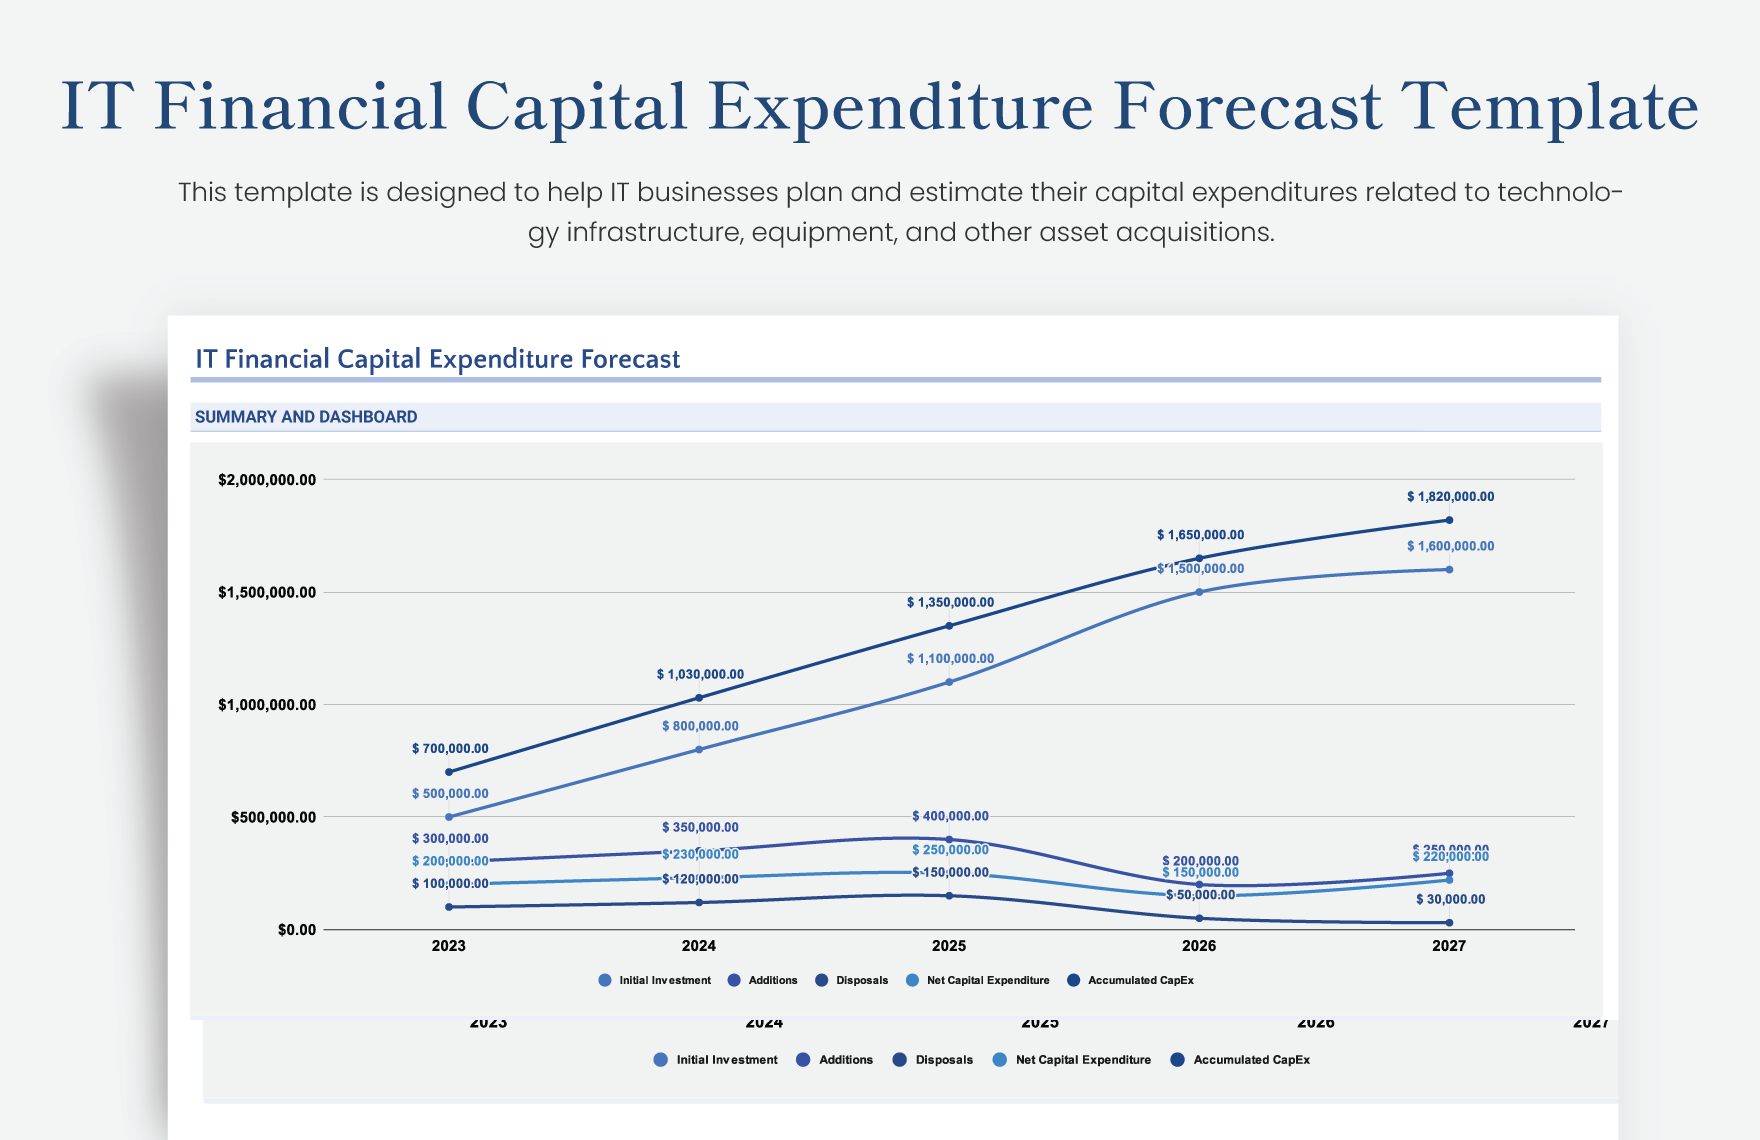 IT Financial Capital Expenditure Forecast Template in Excel, Google Sheets